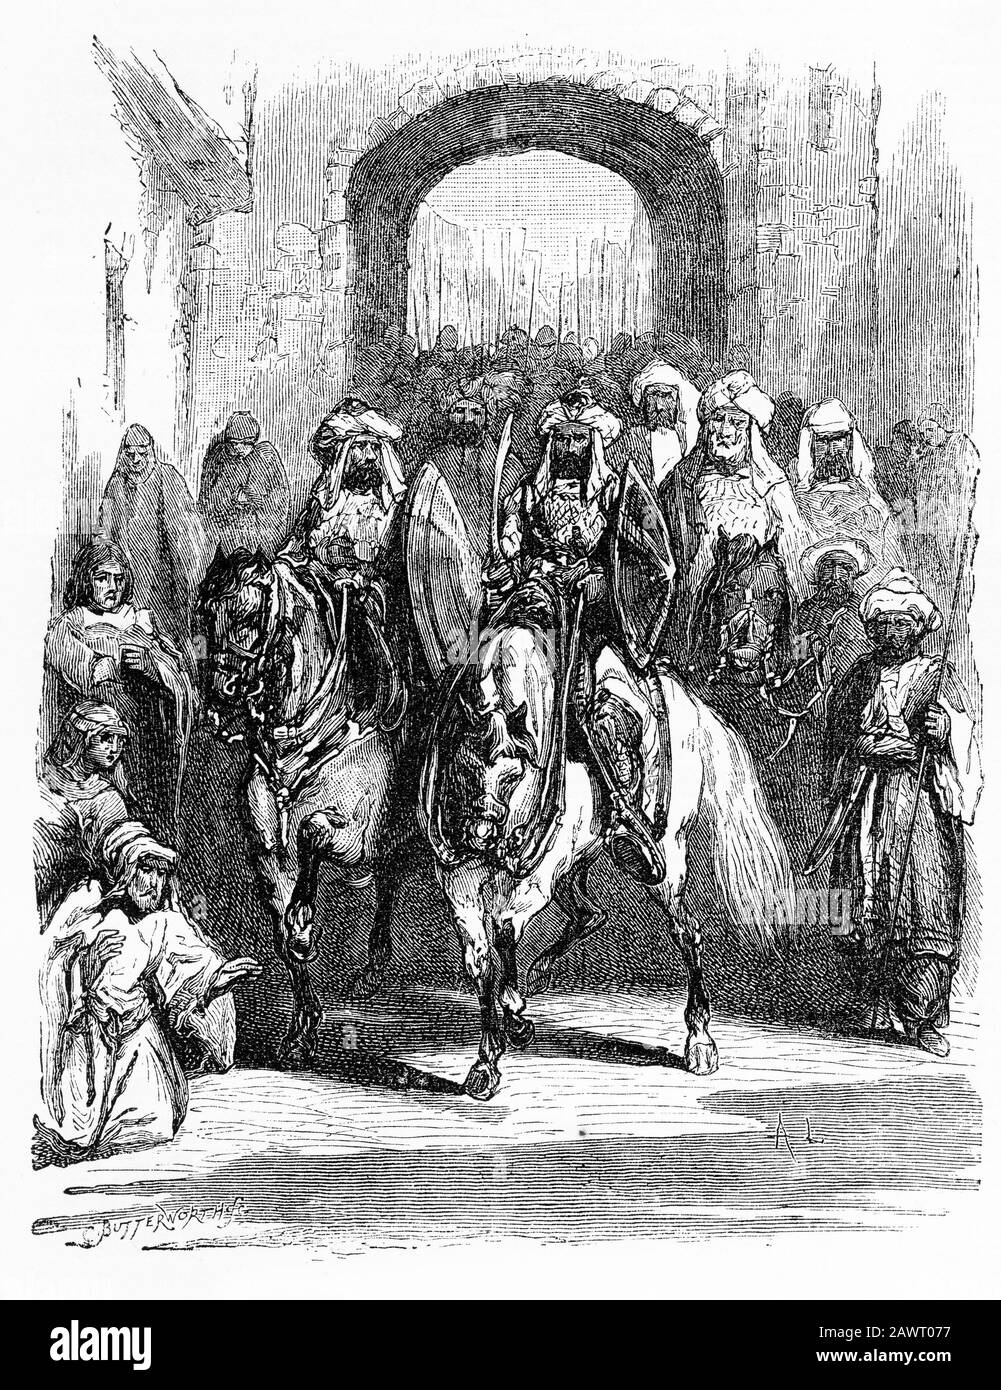 Engraving of Umar (or Omar c. 584 AD – 644 AD) one of the most powerful and influential Muslim caliphs in history, entering Jerusalem in 637 AD, where he later gave direction for building the Dome of the Rock on the Temple Mount. Stock Photo